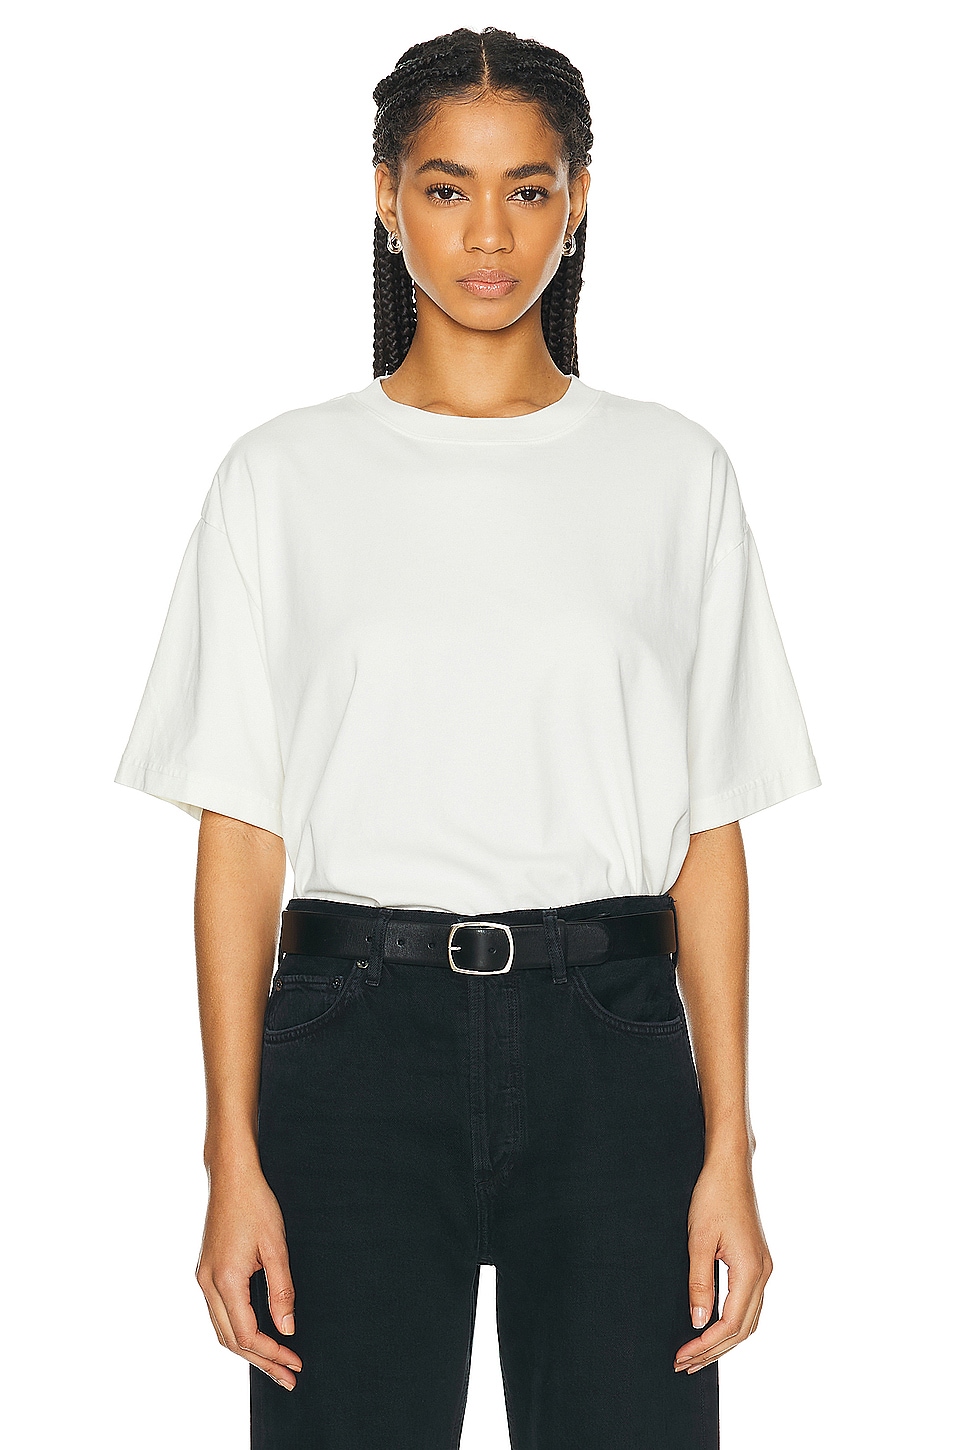 Image 1 of WAO The Relaxed Tee in Off White